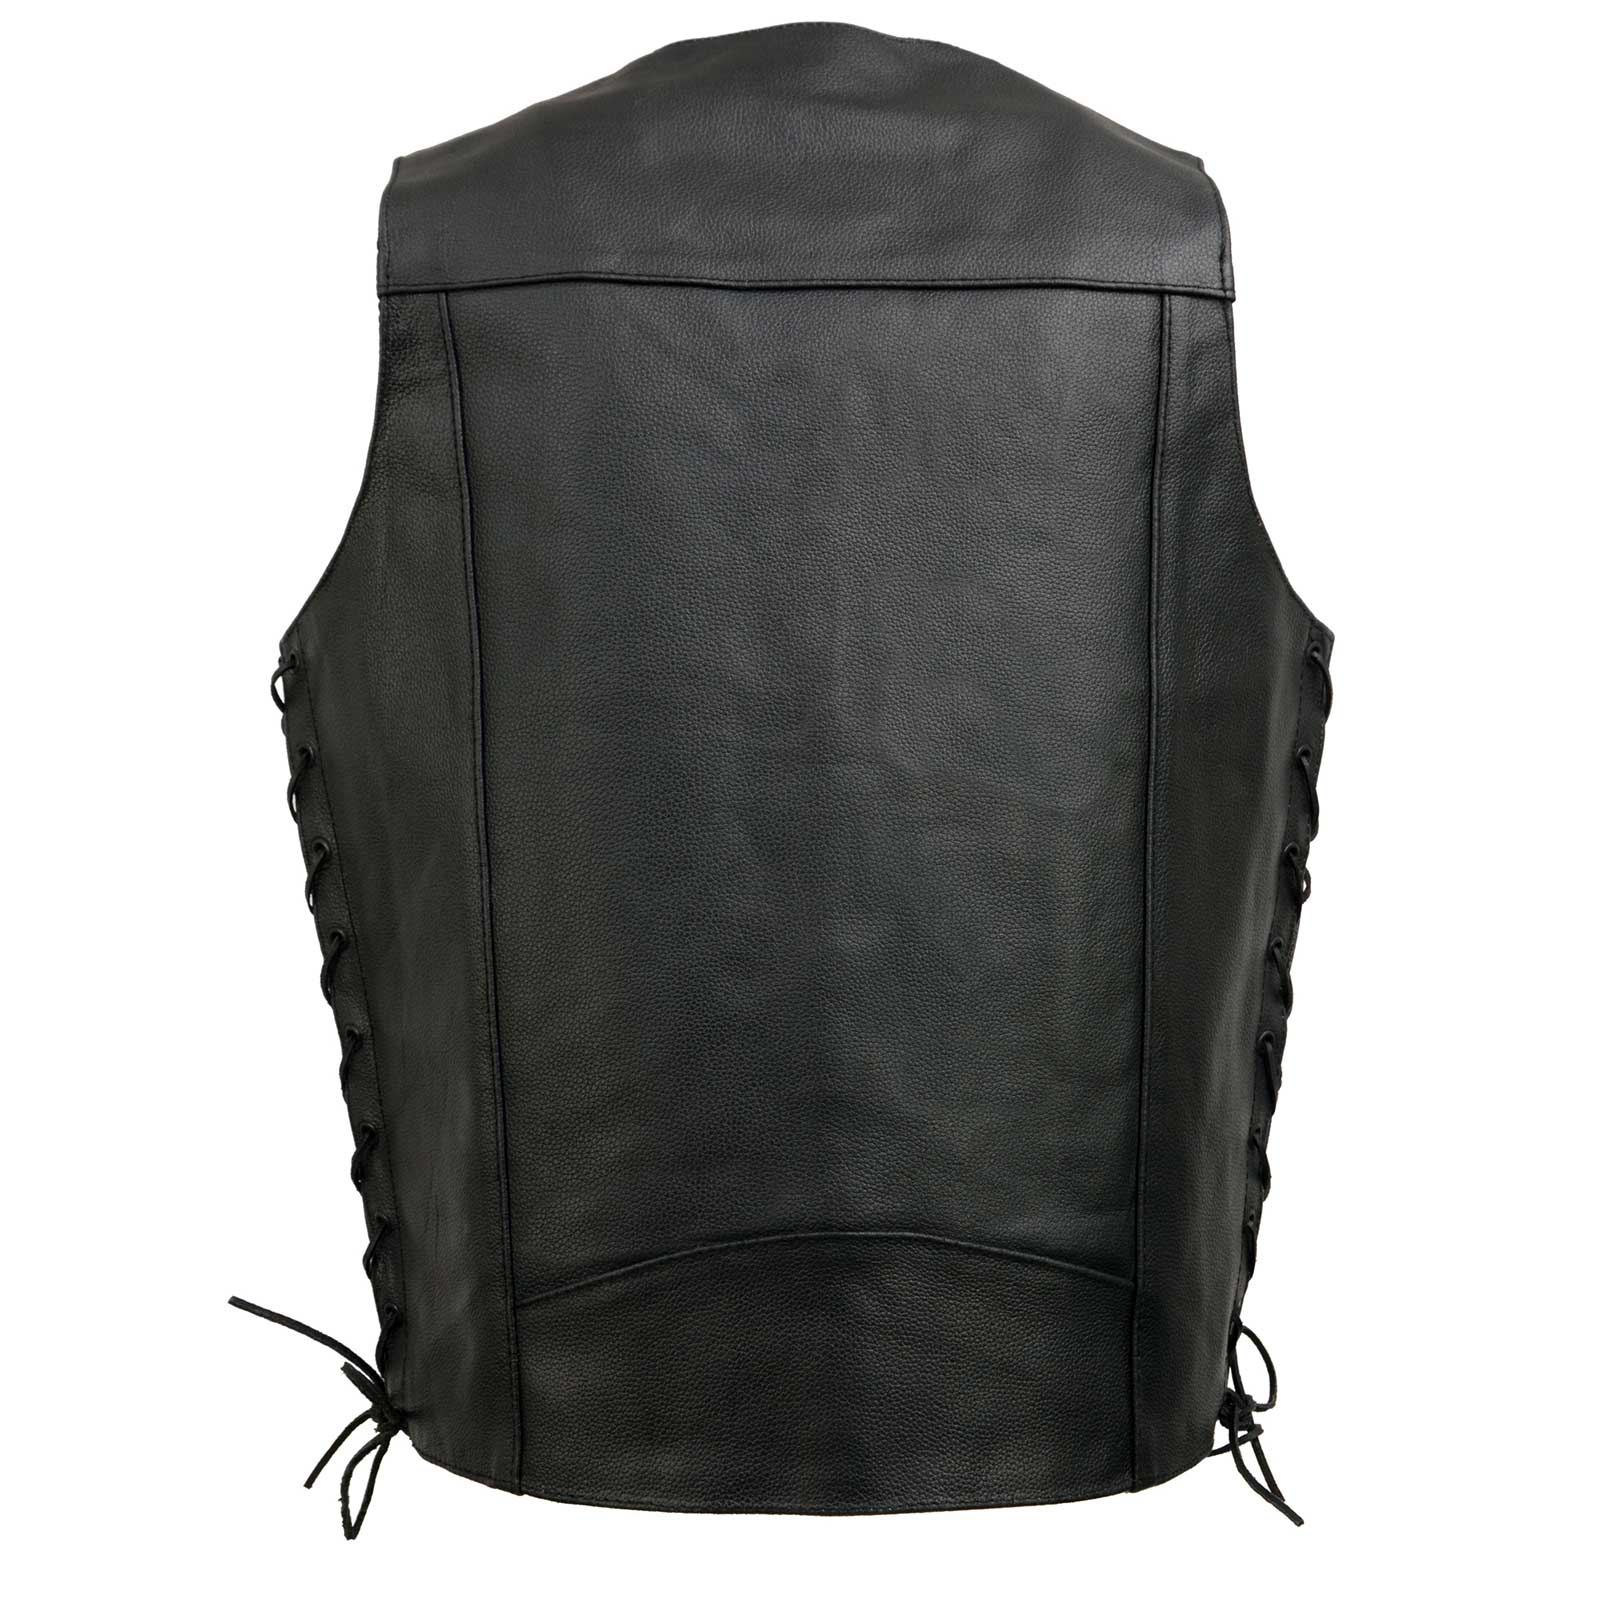 Event Leather EL5315TALL Black Motorcycle Leather Vest for Men's Tall Sizes Riding Club Adult Motorcycle Vests